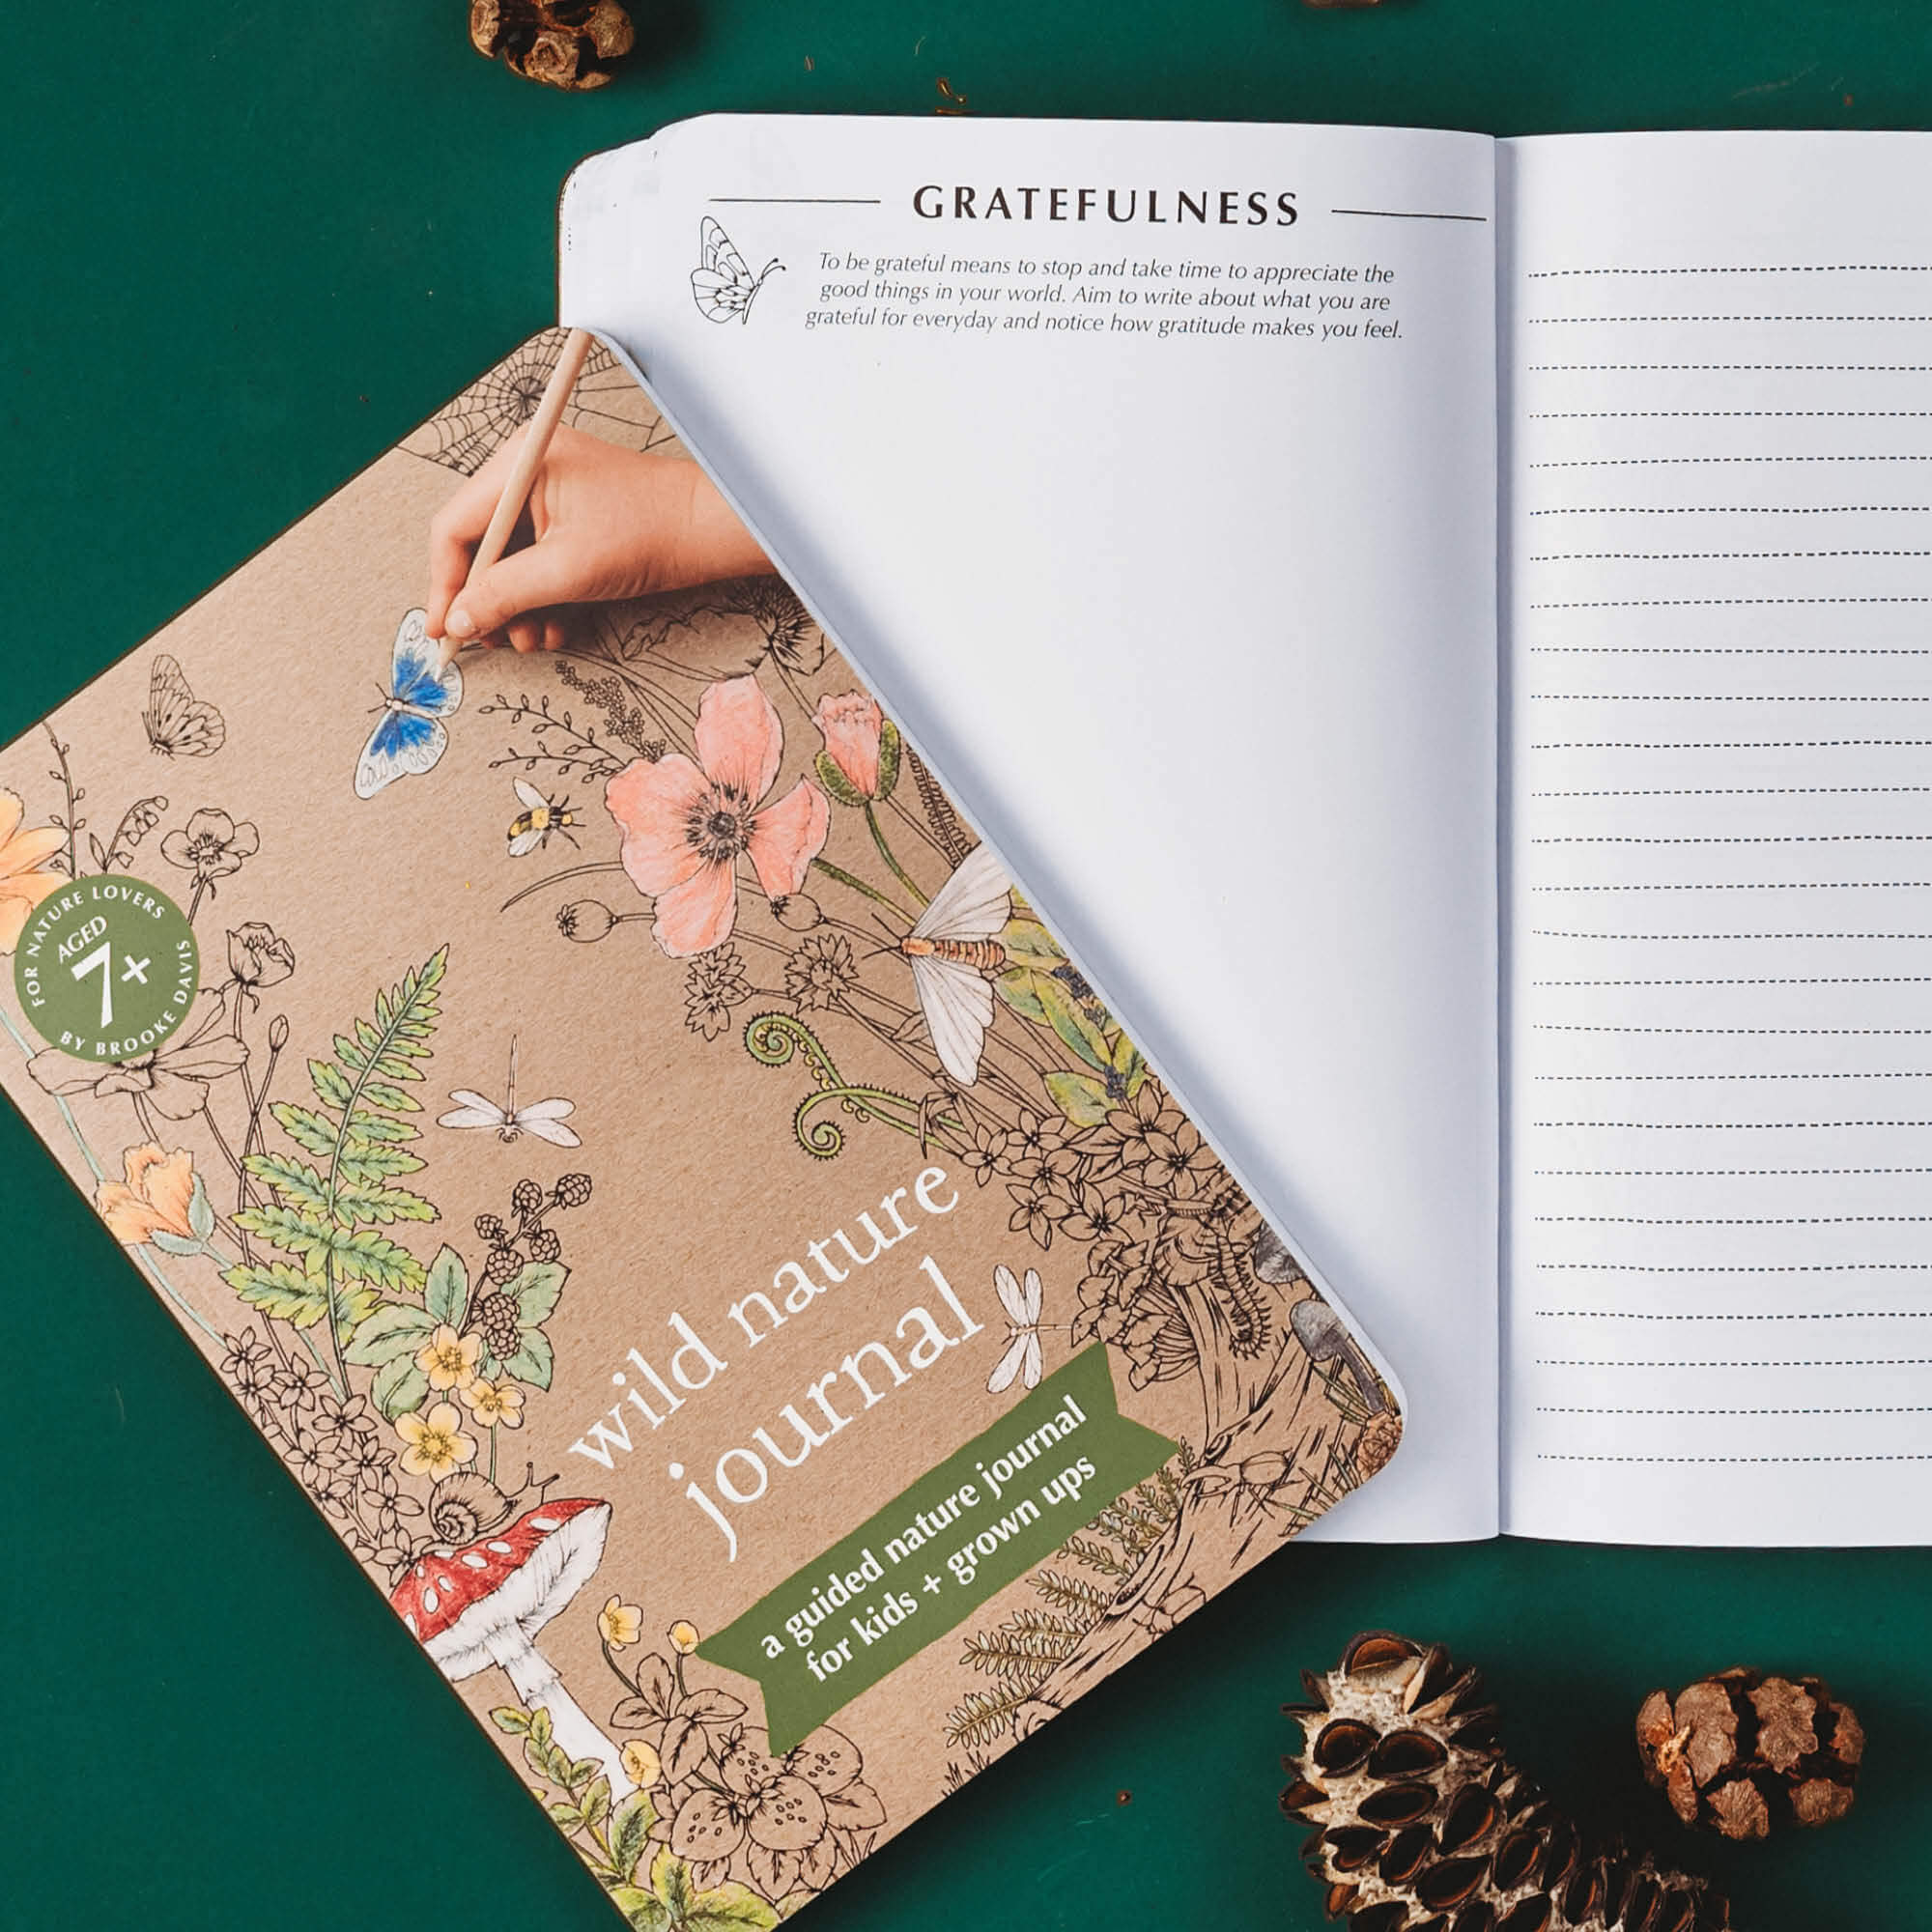 Gratefulness journalling prompt from Wild Nature Journal, a guided nature journal for kids and grown ups is made in Australia by Your Wild Books.